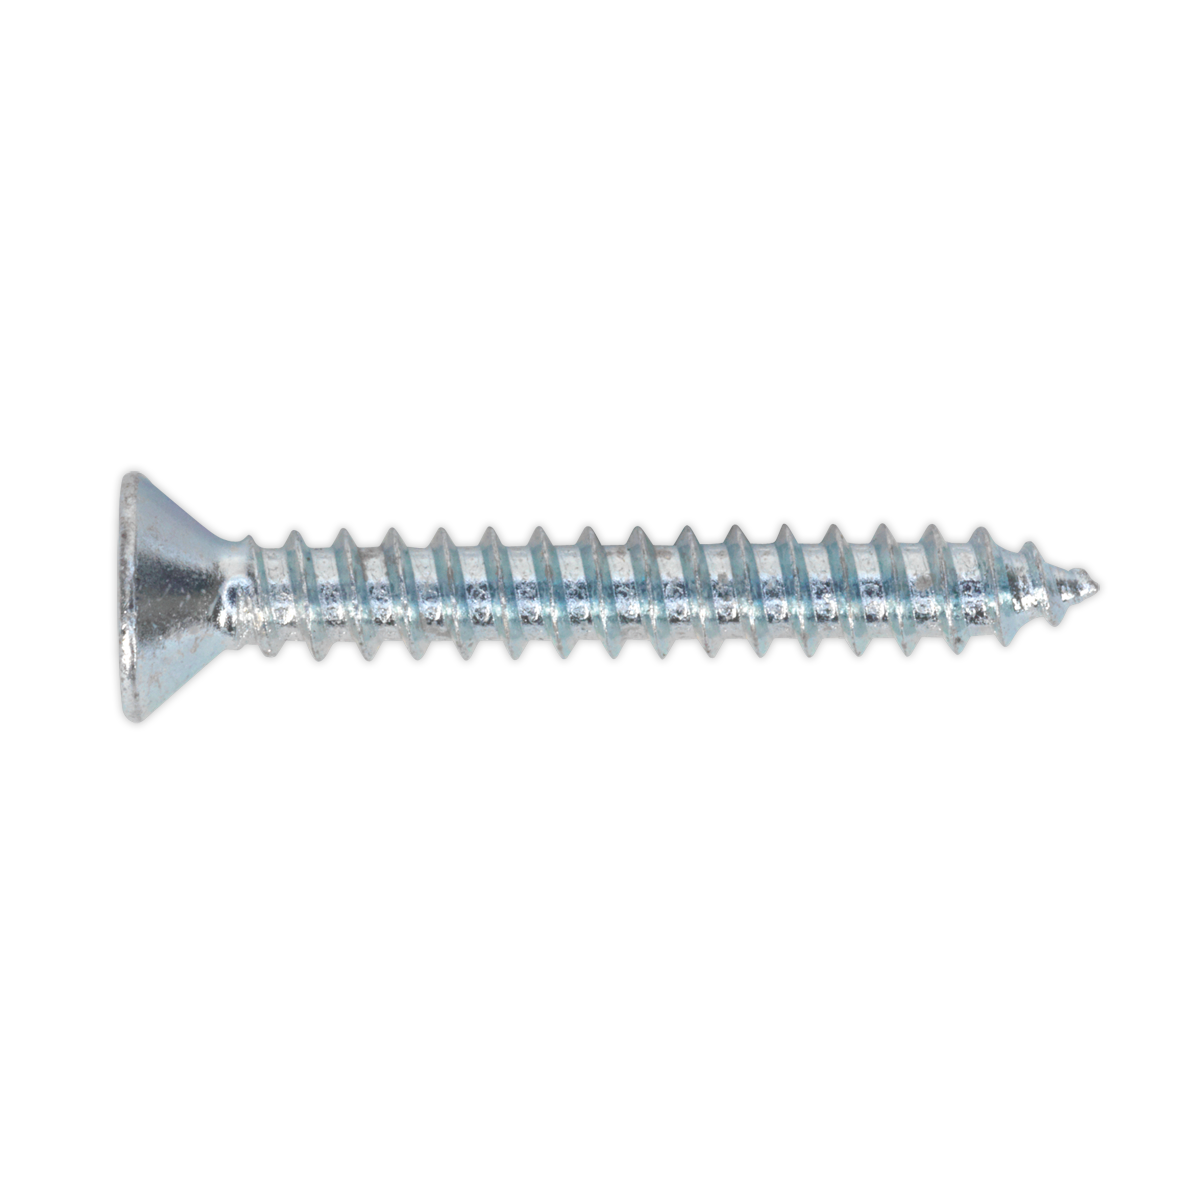 Self Tapping Screw 3.5 x 25mm Countersunk Pozi Pack of 100 - ST3525 - Farming Parts